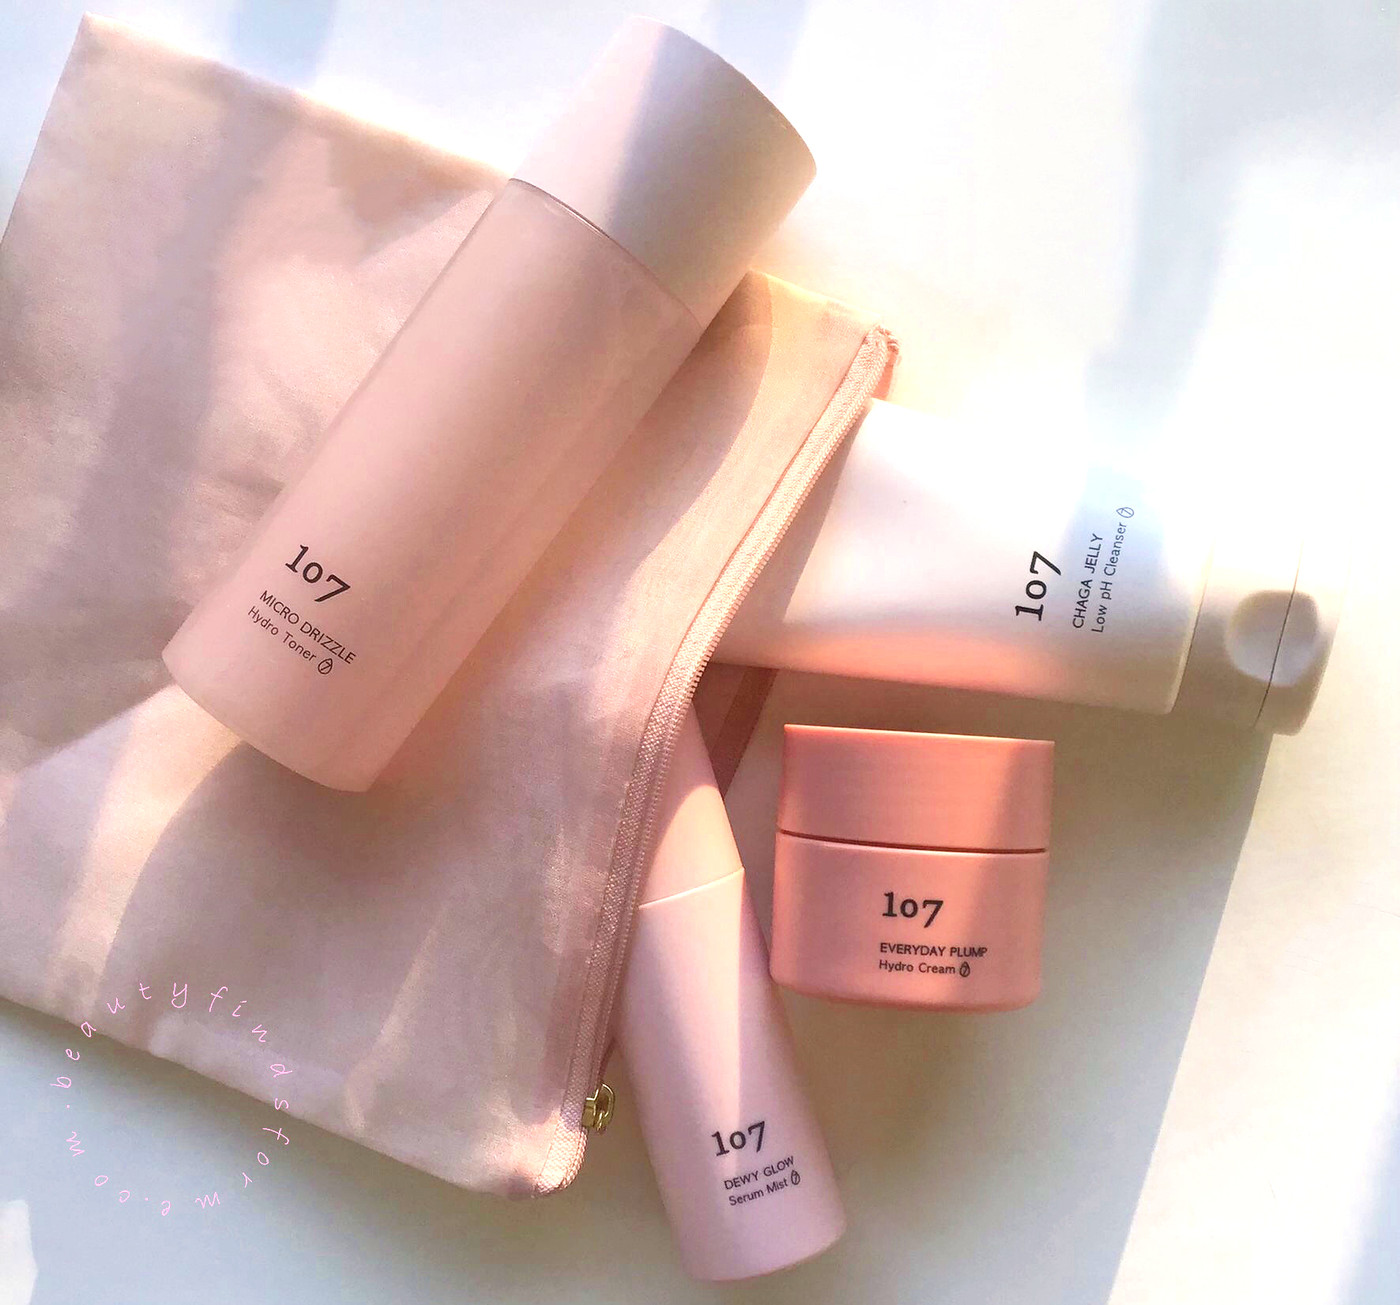 107 Skincare – Renewed and Relaunched! – Unboxing Beauty